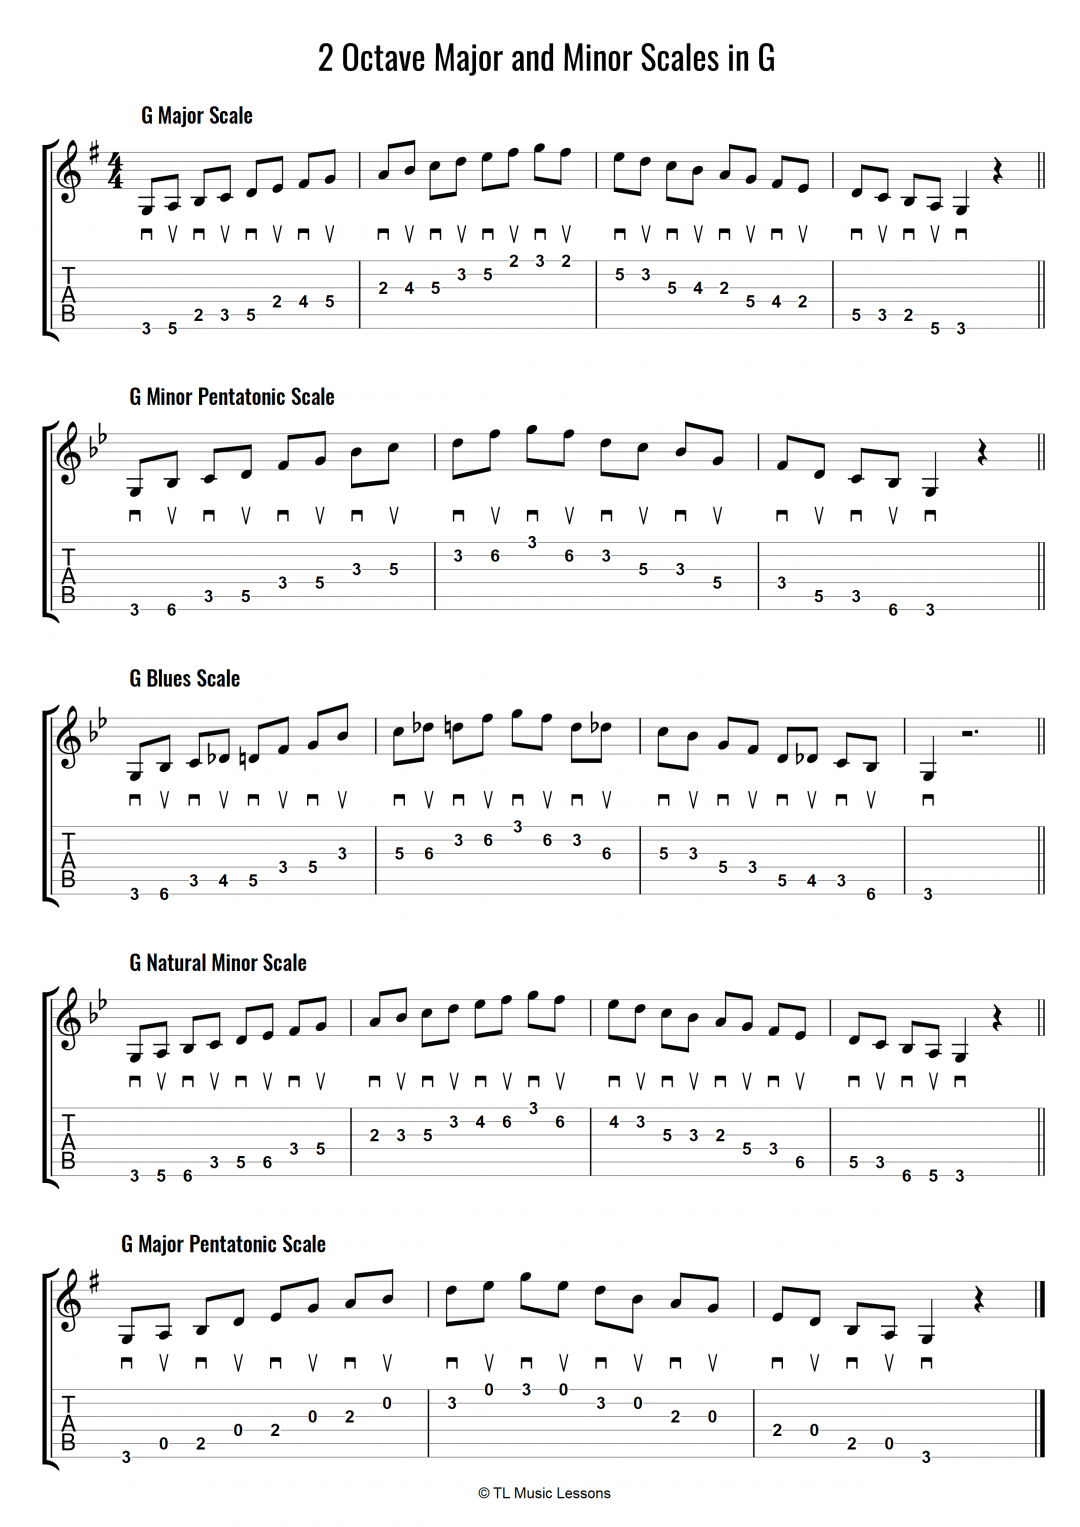 2 Octave Major and Minor Scales in G